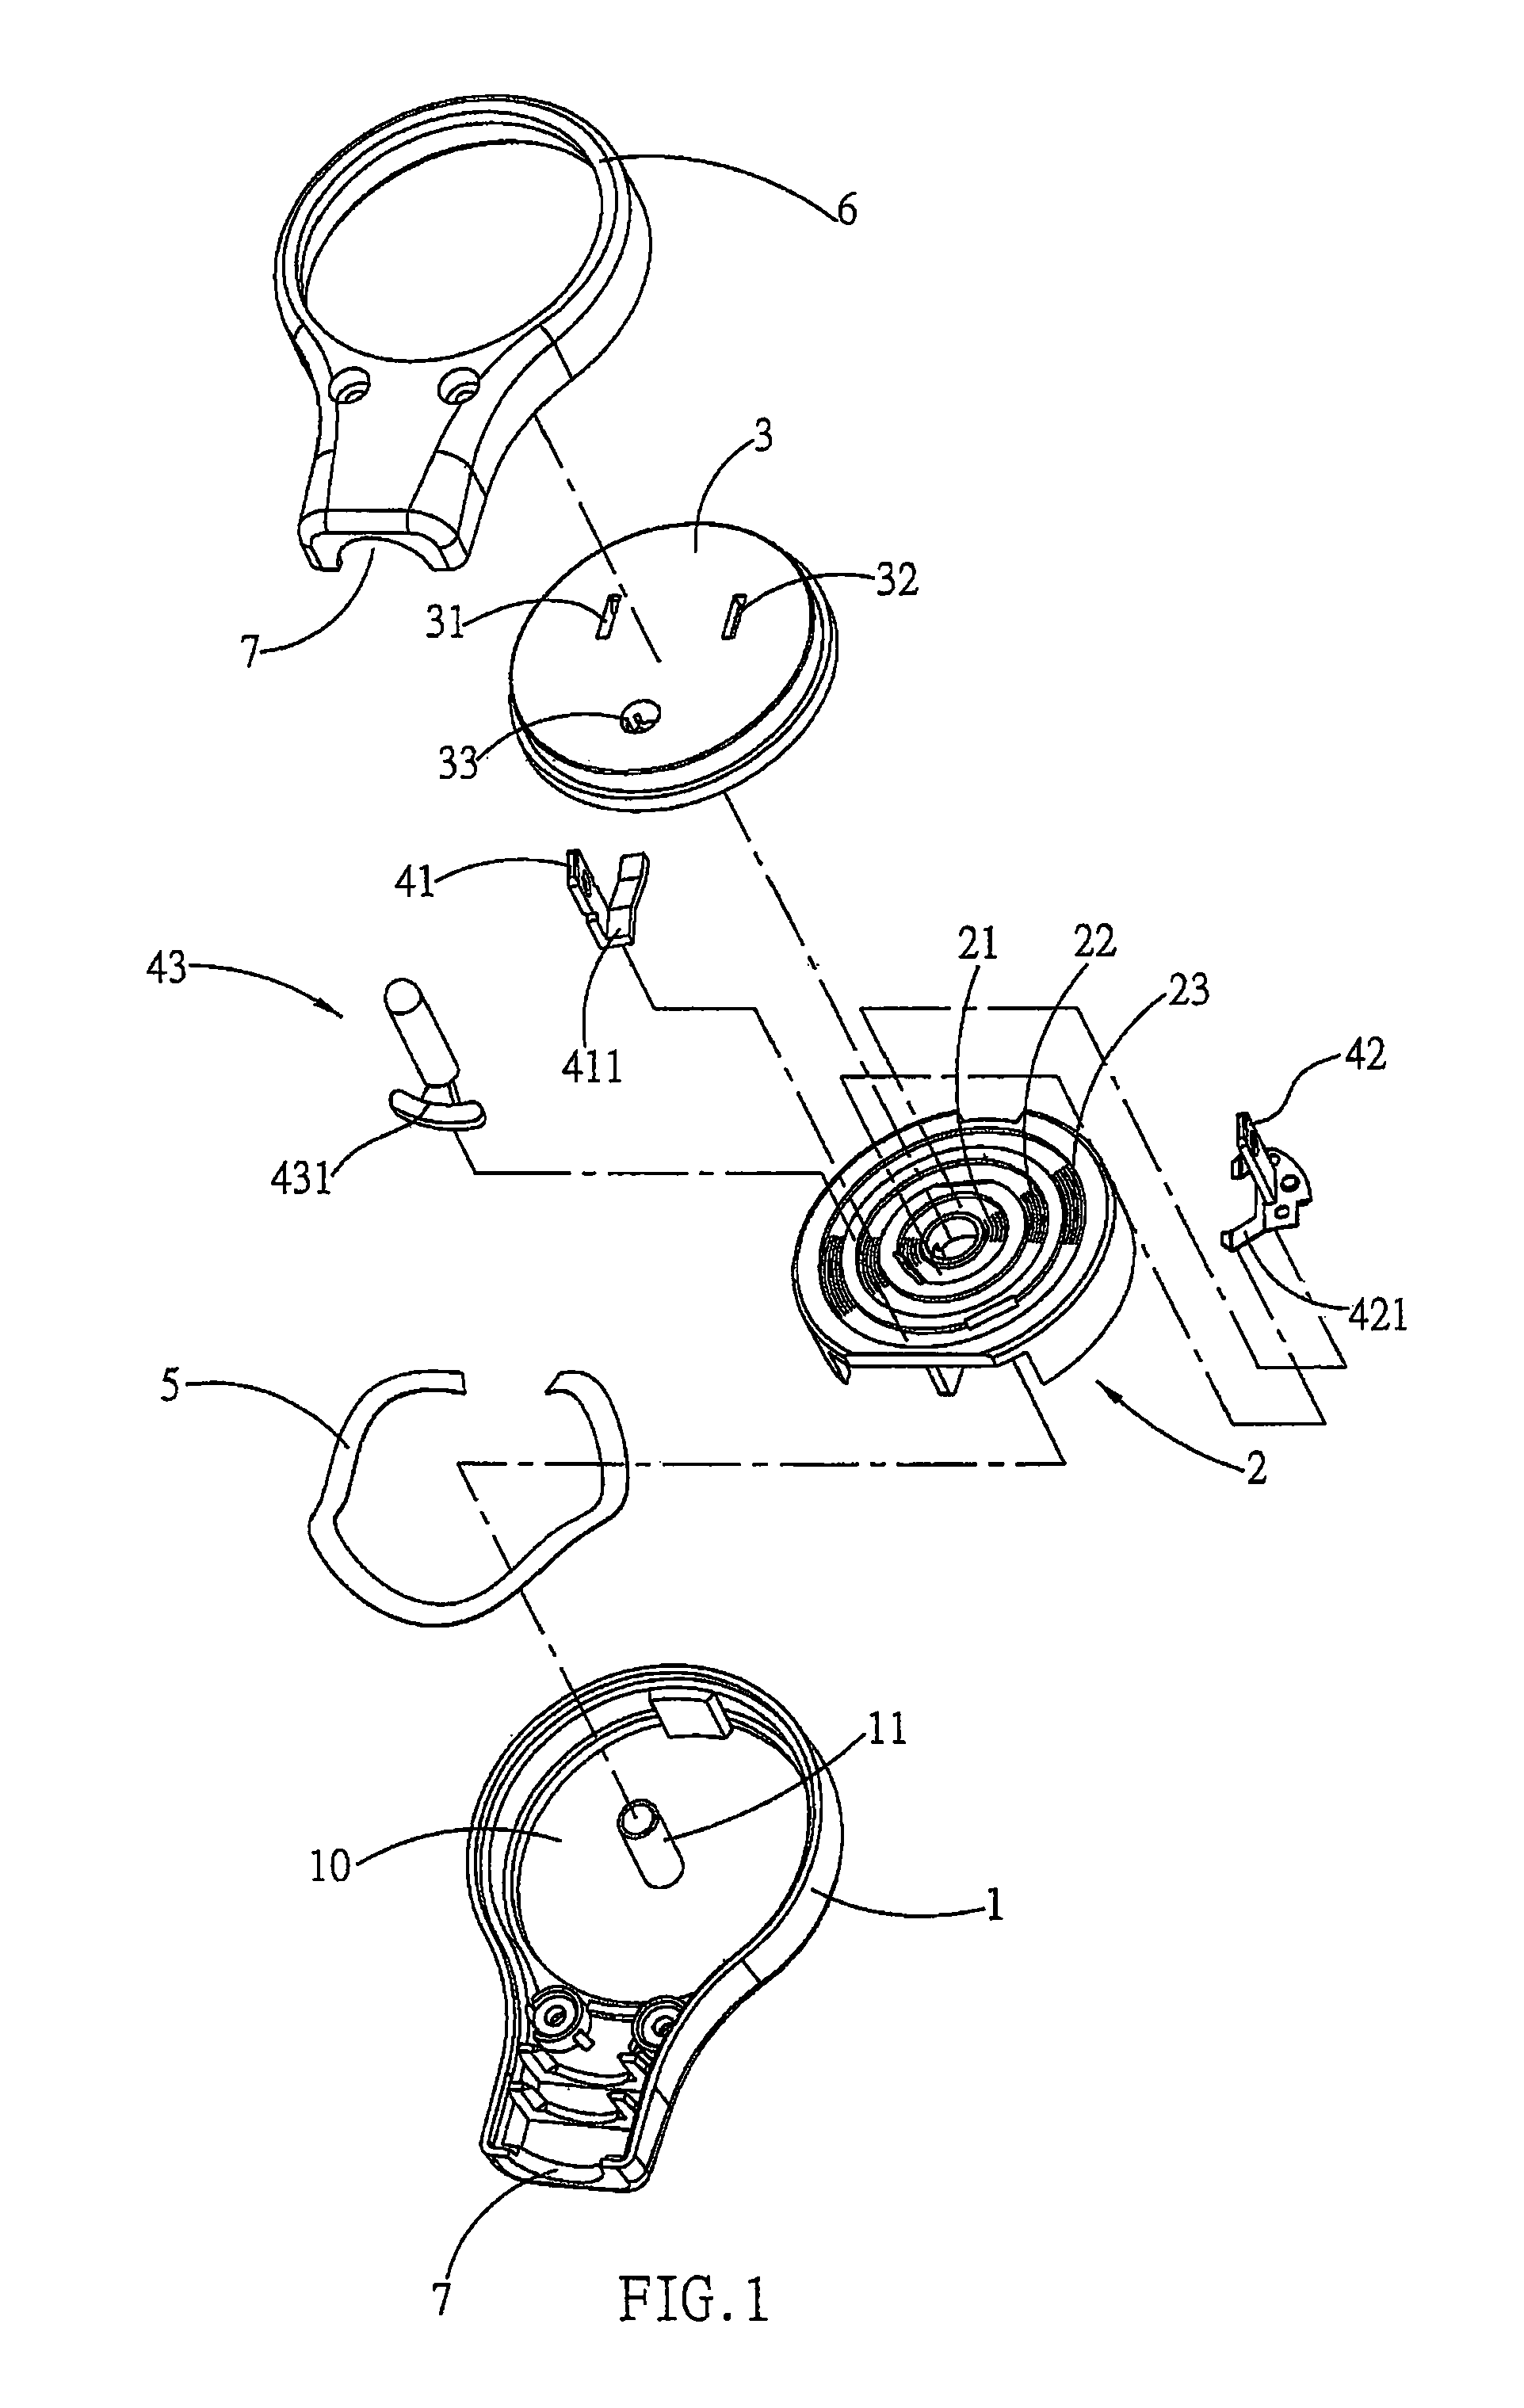 Power plug with a freely rotatable delivery point